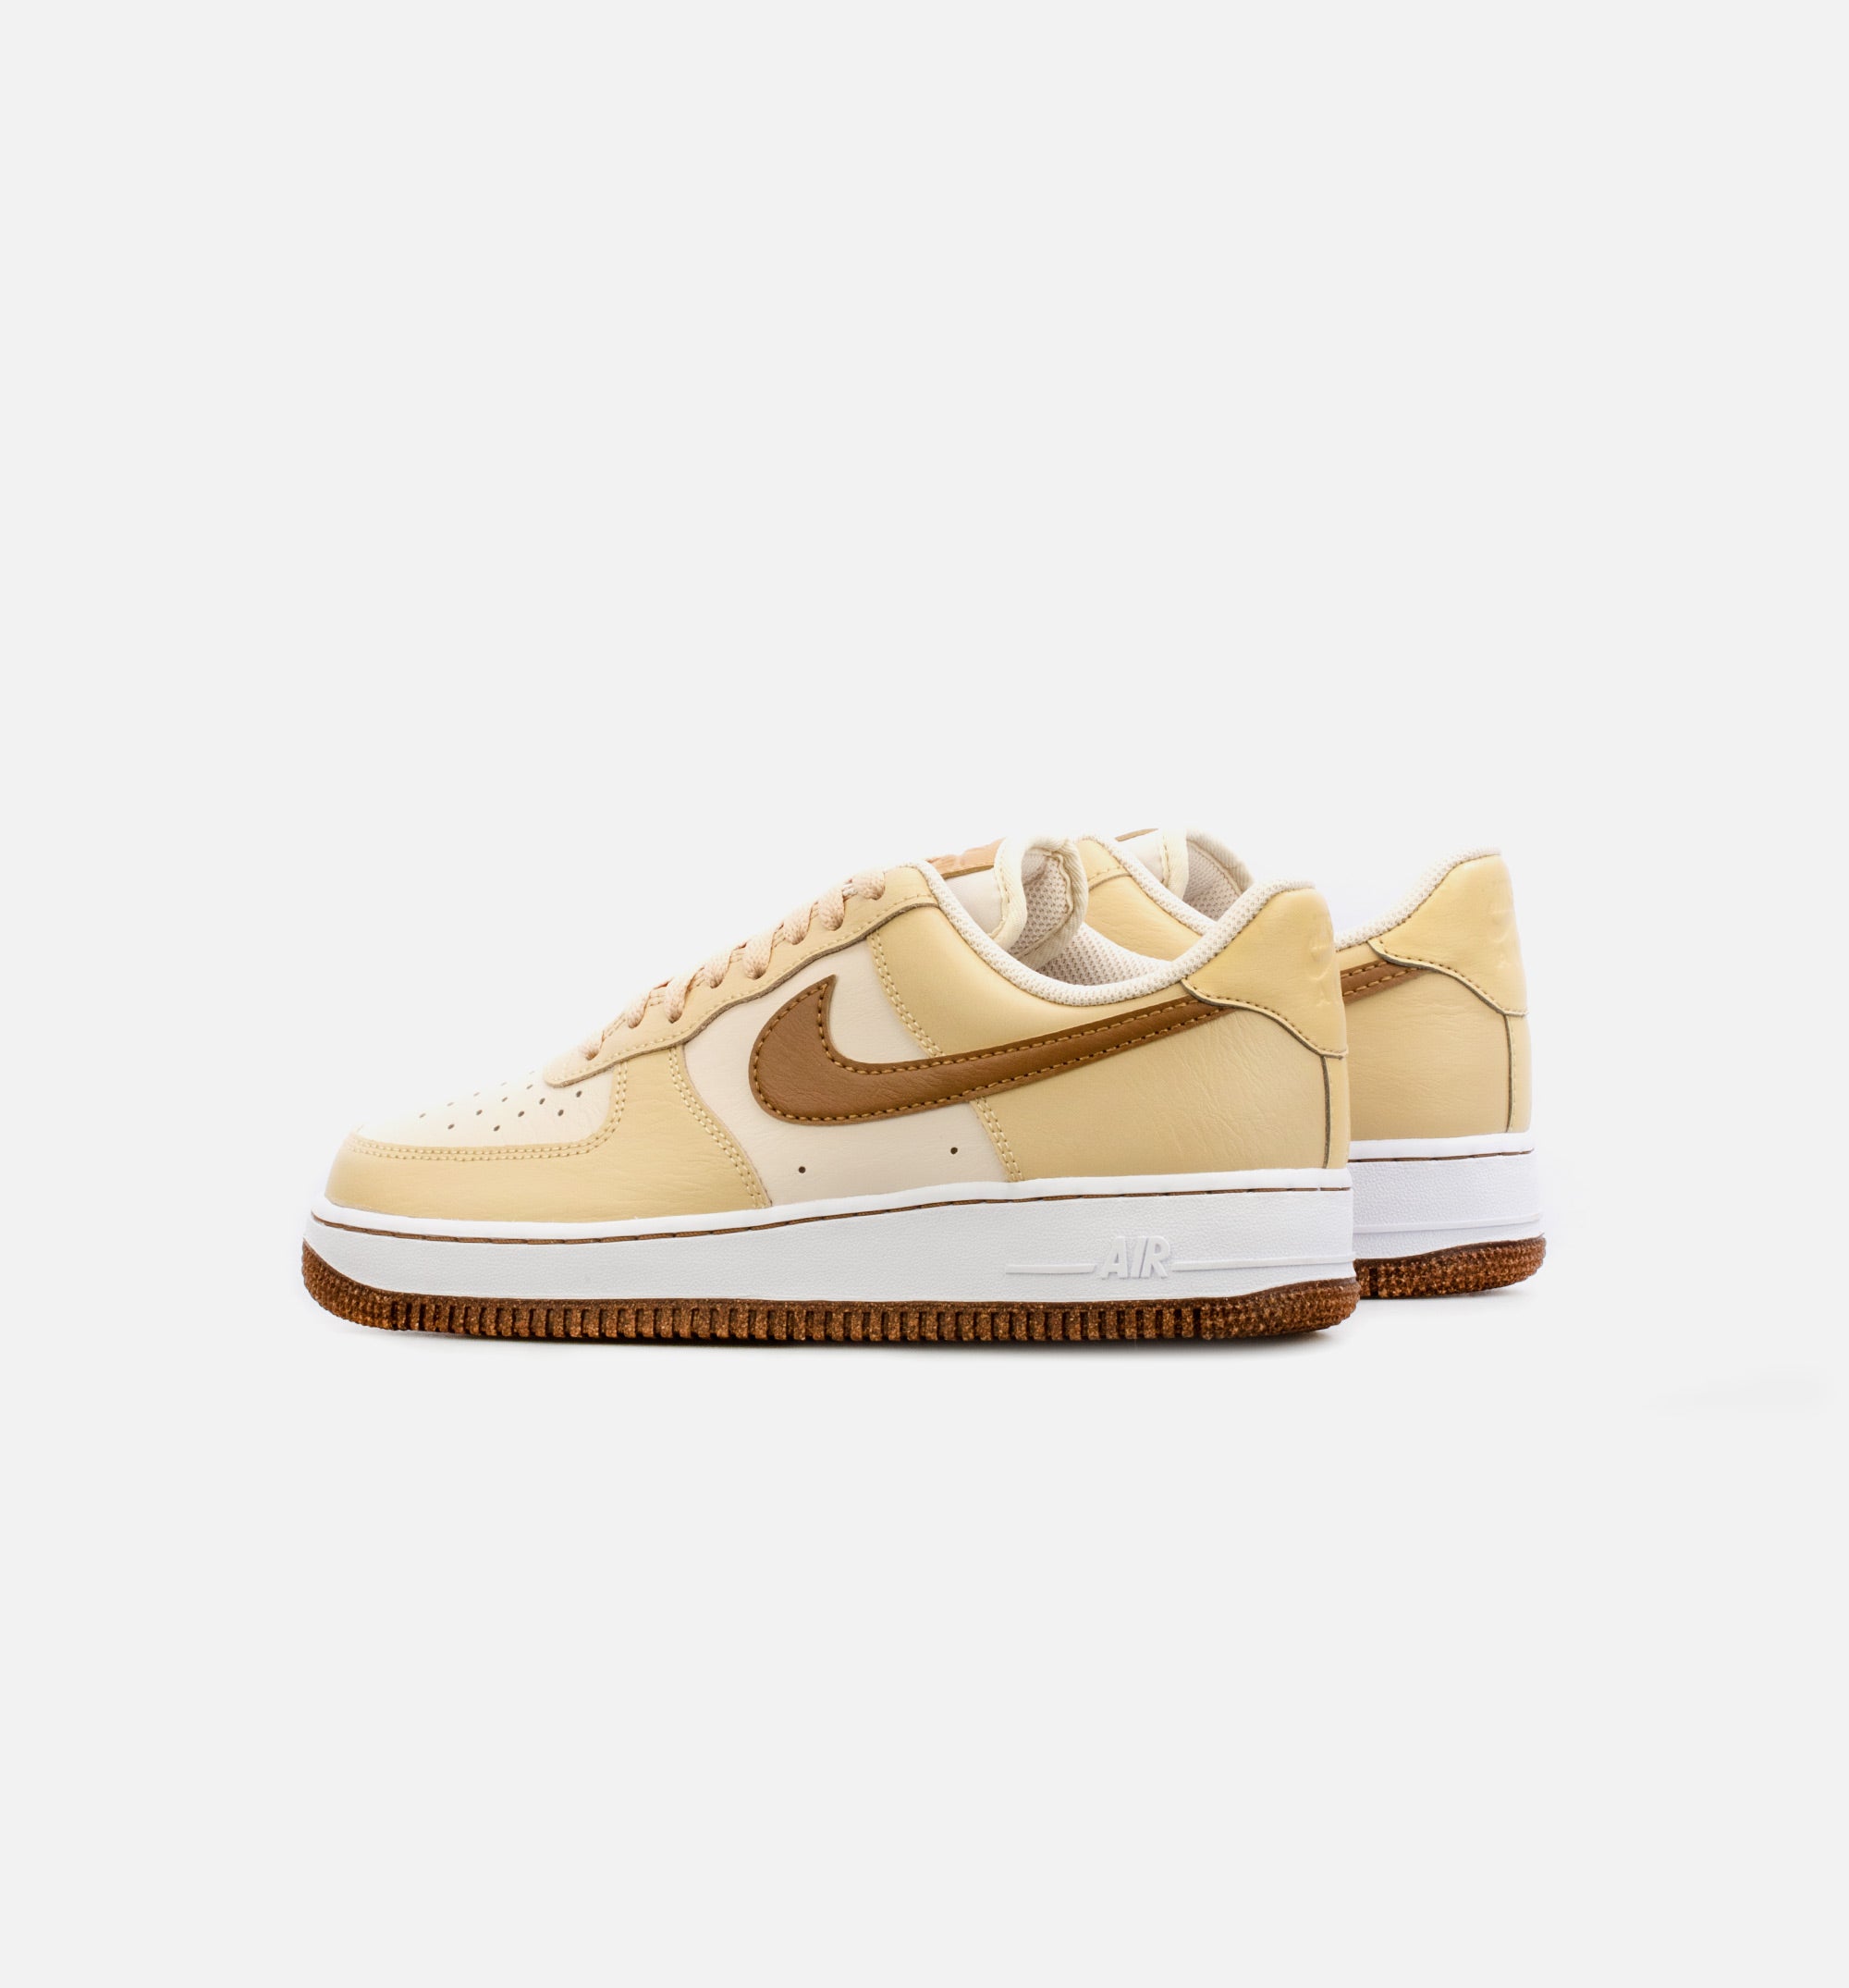 Buy Air Force 1 '07 LV8 EMB 'Inspected By Swoosh' - DQ7660 200